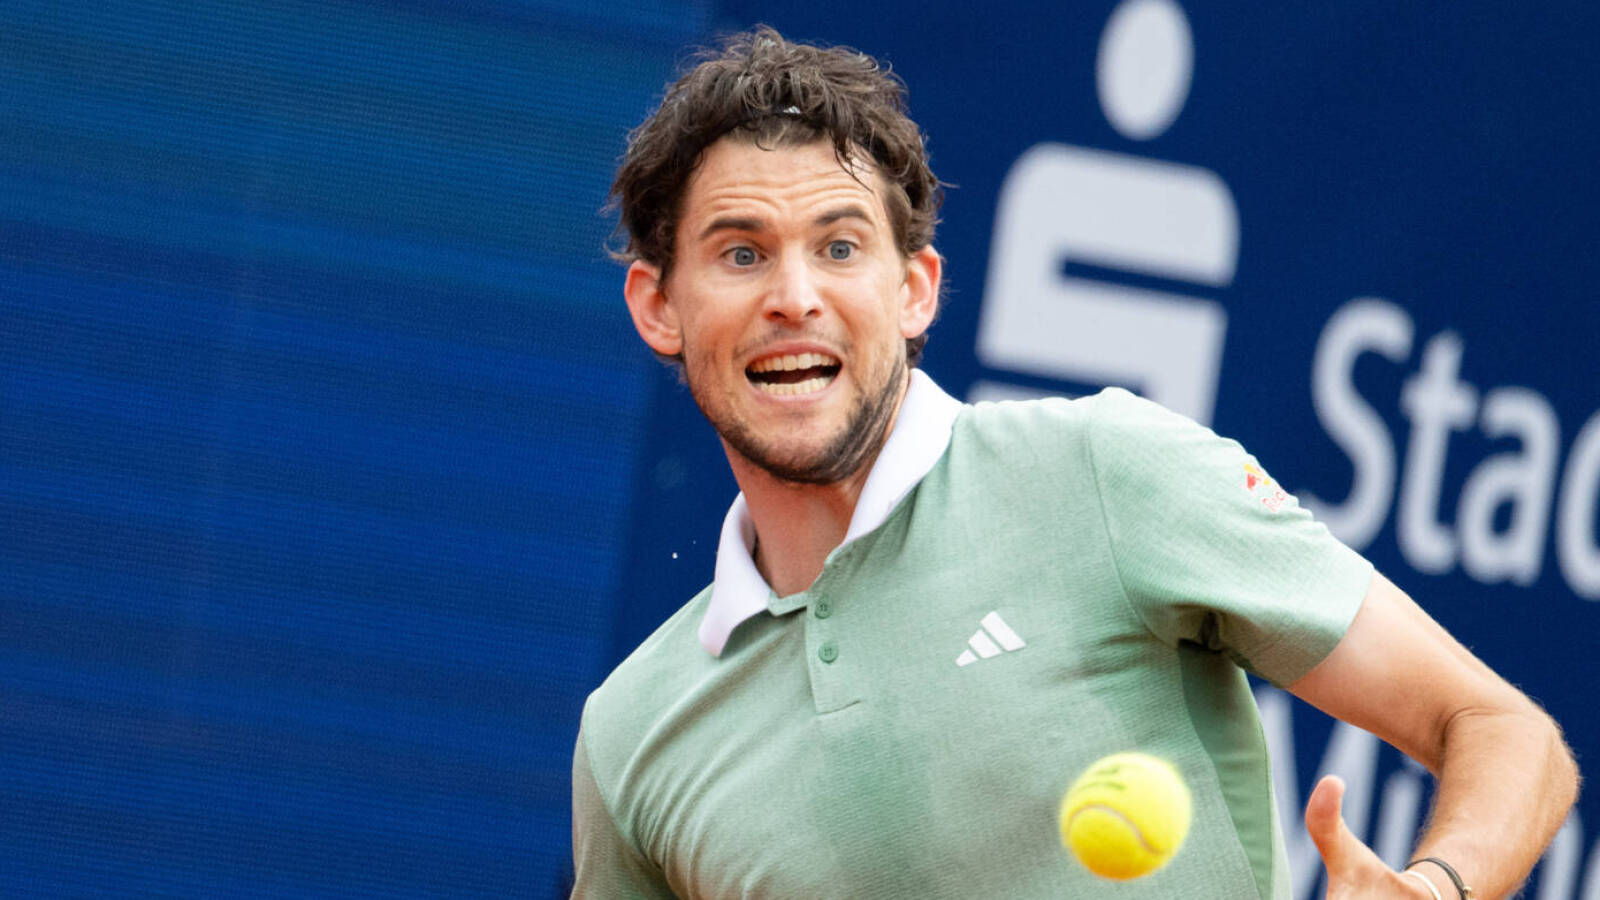 After French Open wild card snub, Dominic Thiem set to participate in THIS tournament